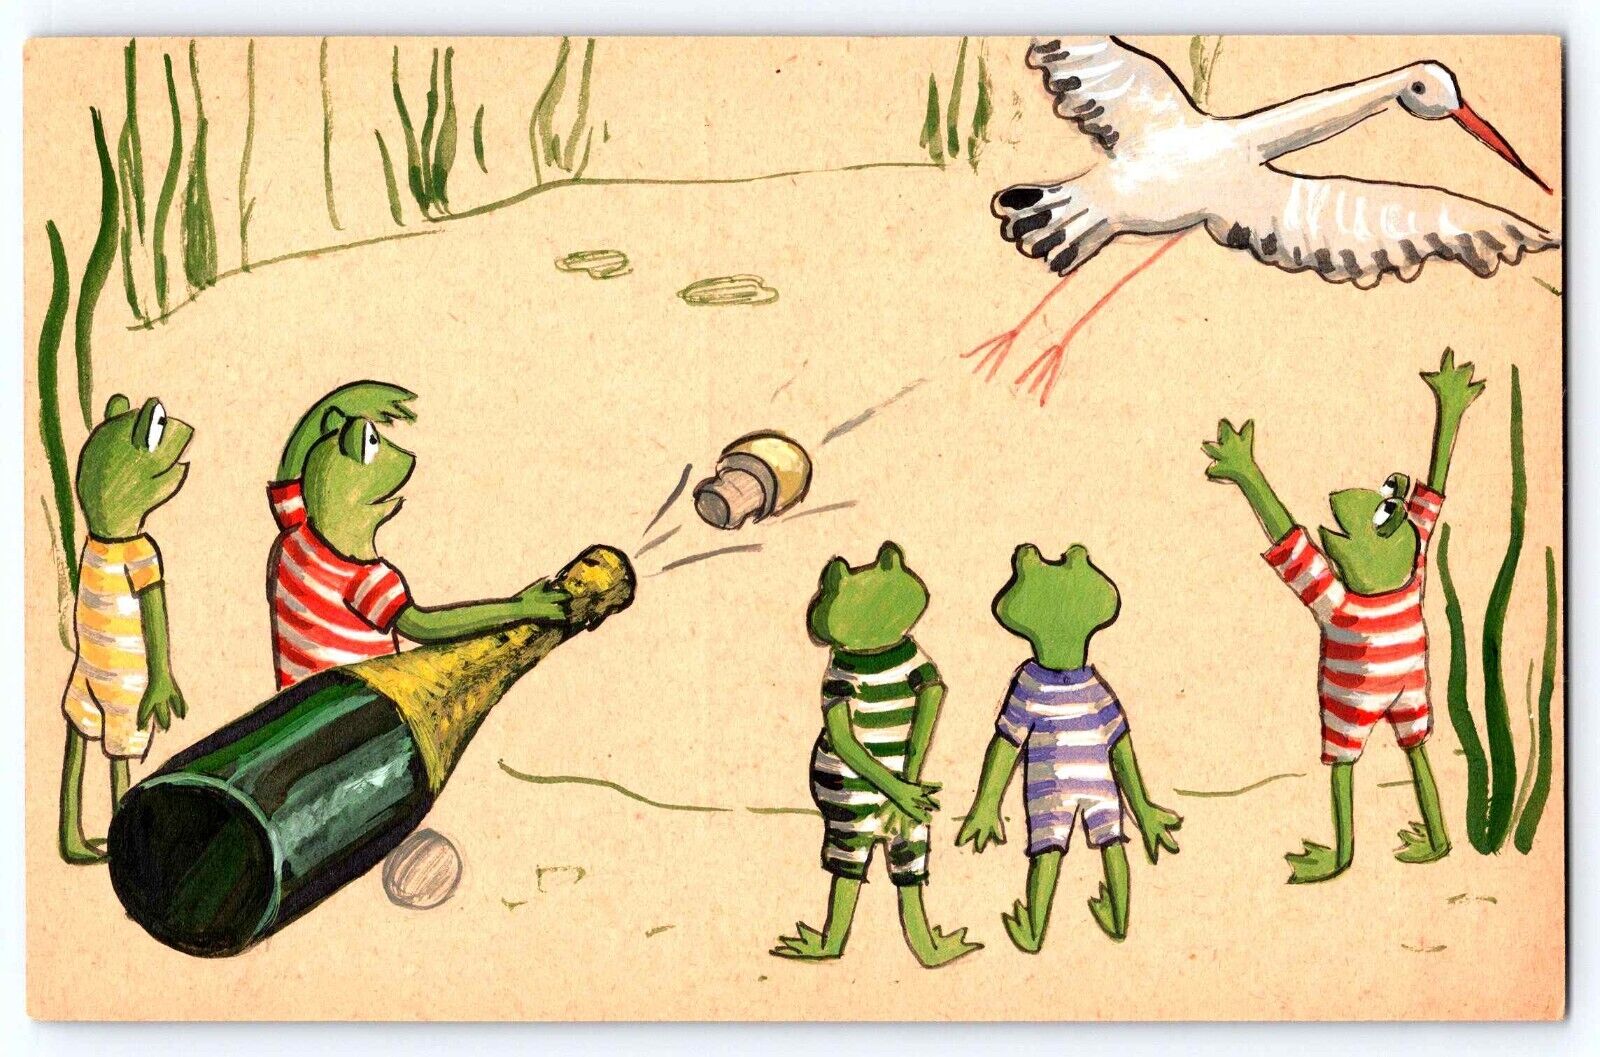 Anthropomorphic Dressed Frogs Fantasy Postcard Chasing Pelican Away pre-1910